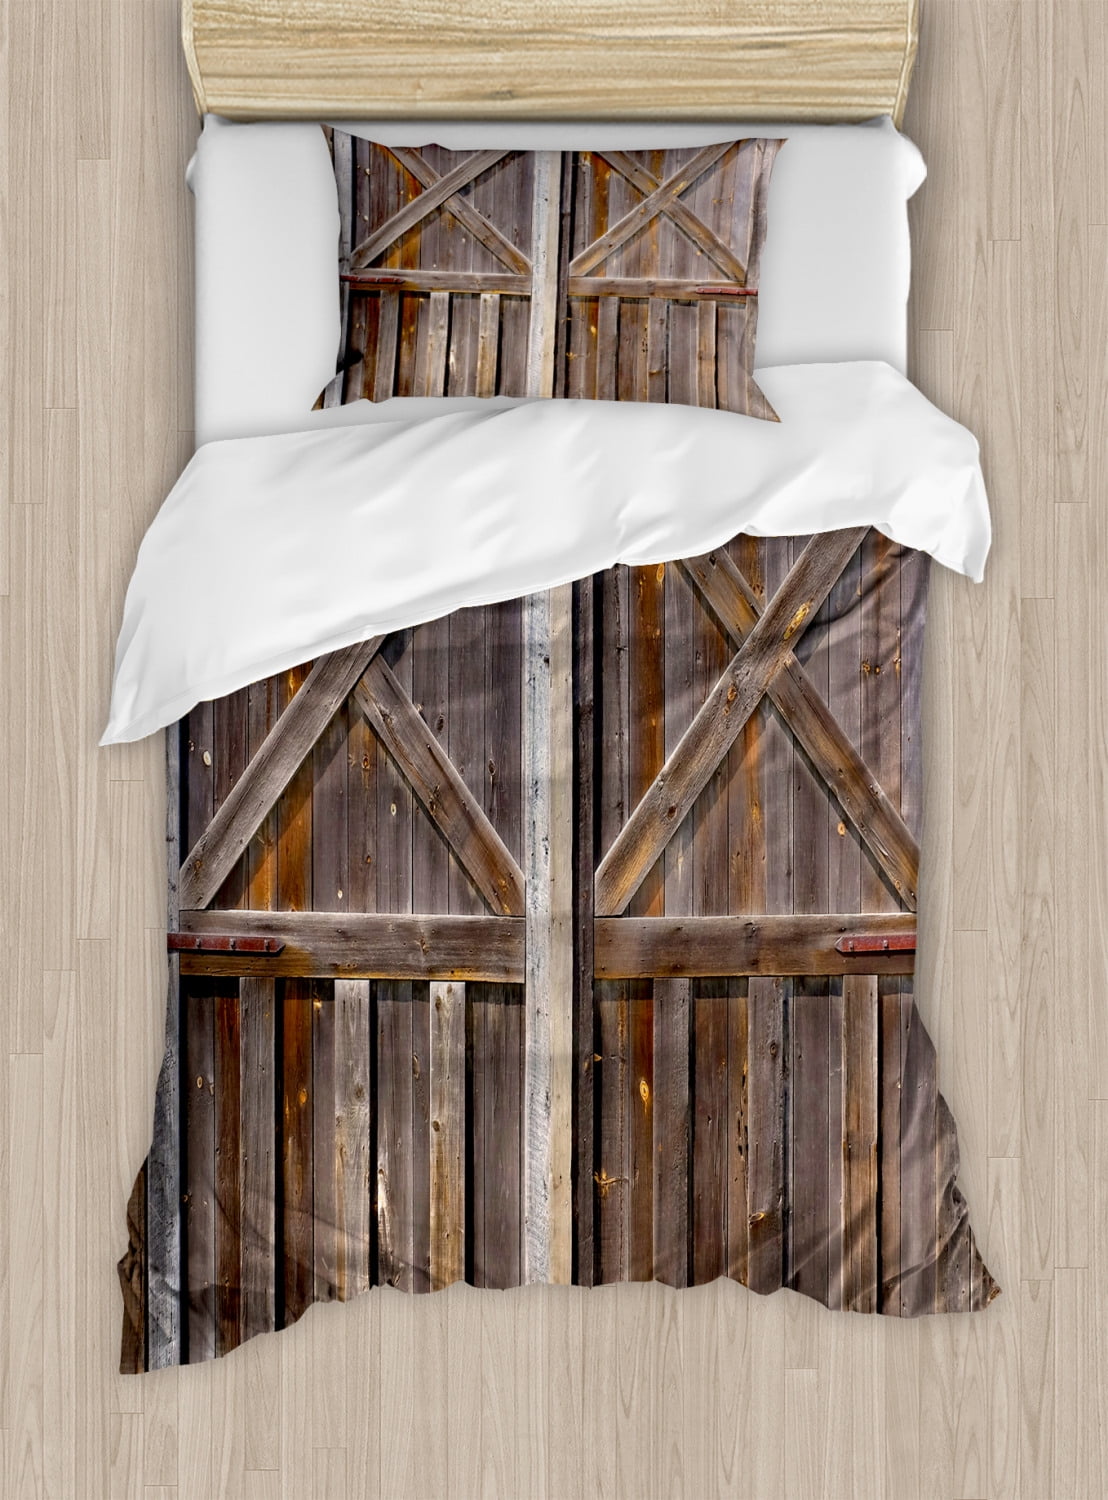 Rustic Twin Size Duvet Cover Set, Old Wooden Barn Door of Farmhouse Oak Countryside Village